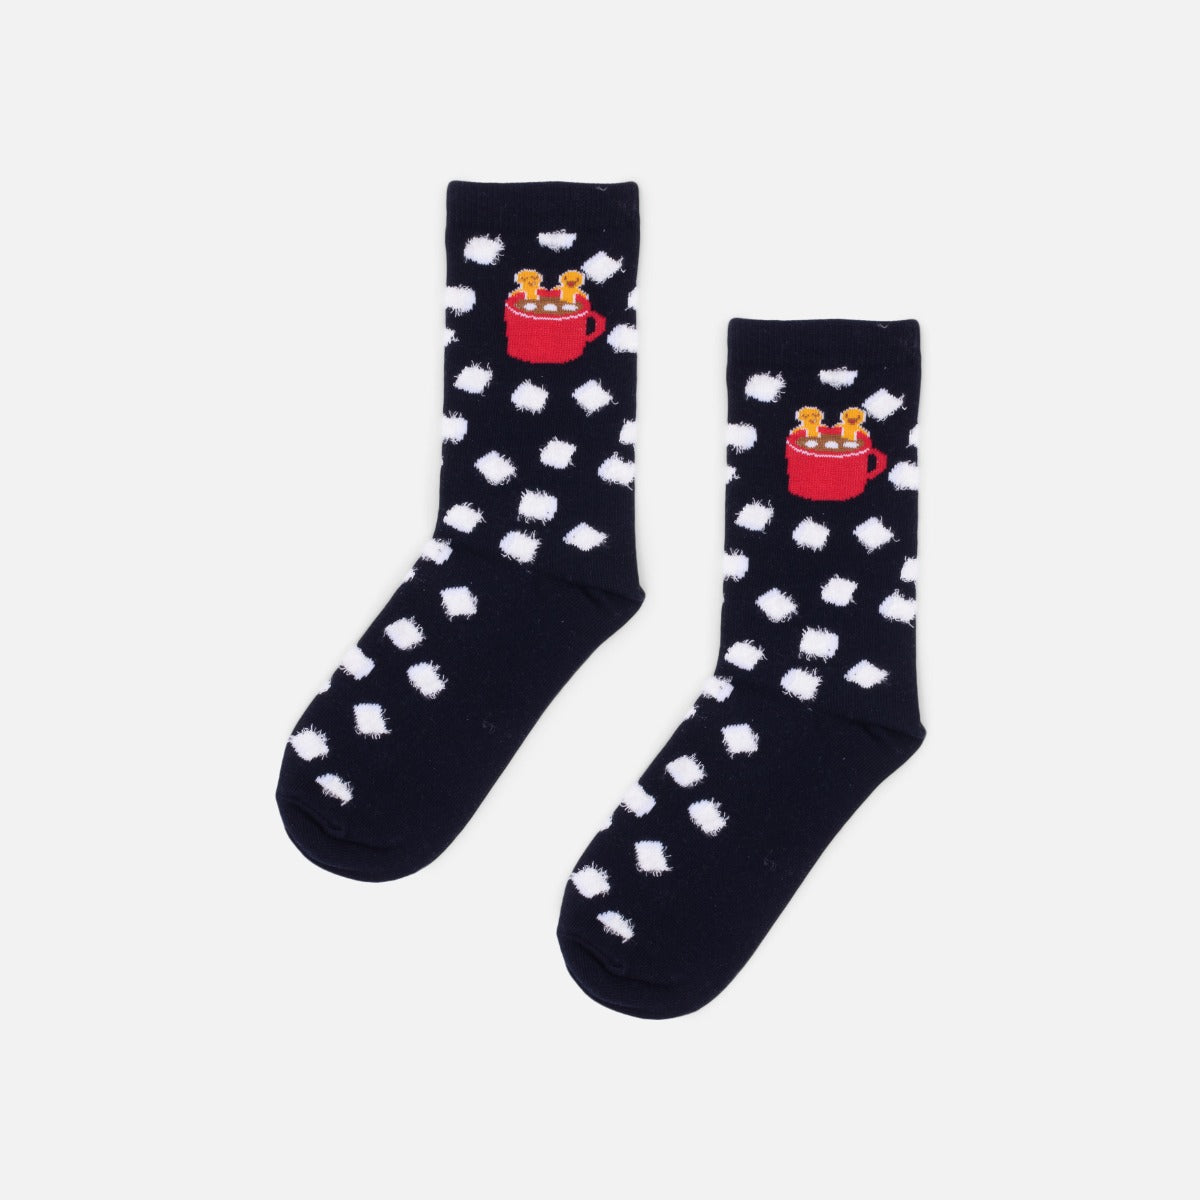 Navy blue socks with gingerbread men and marshmallows